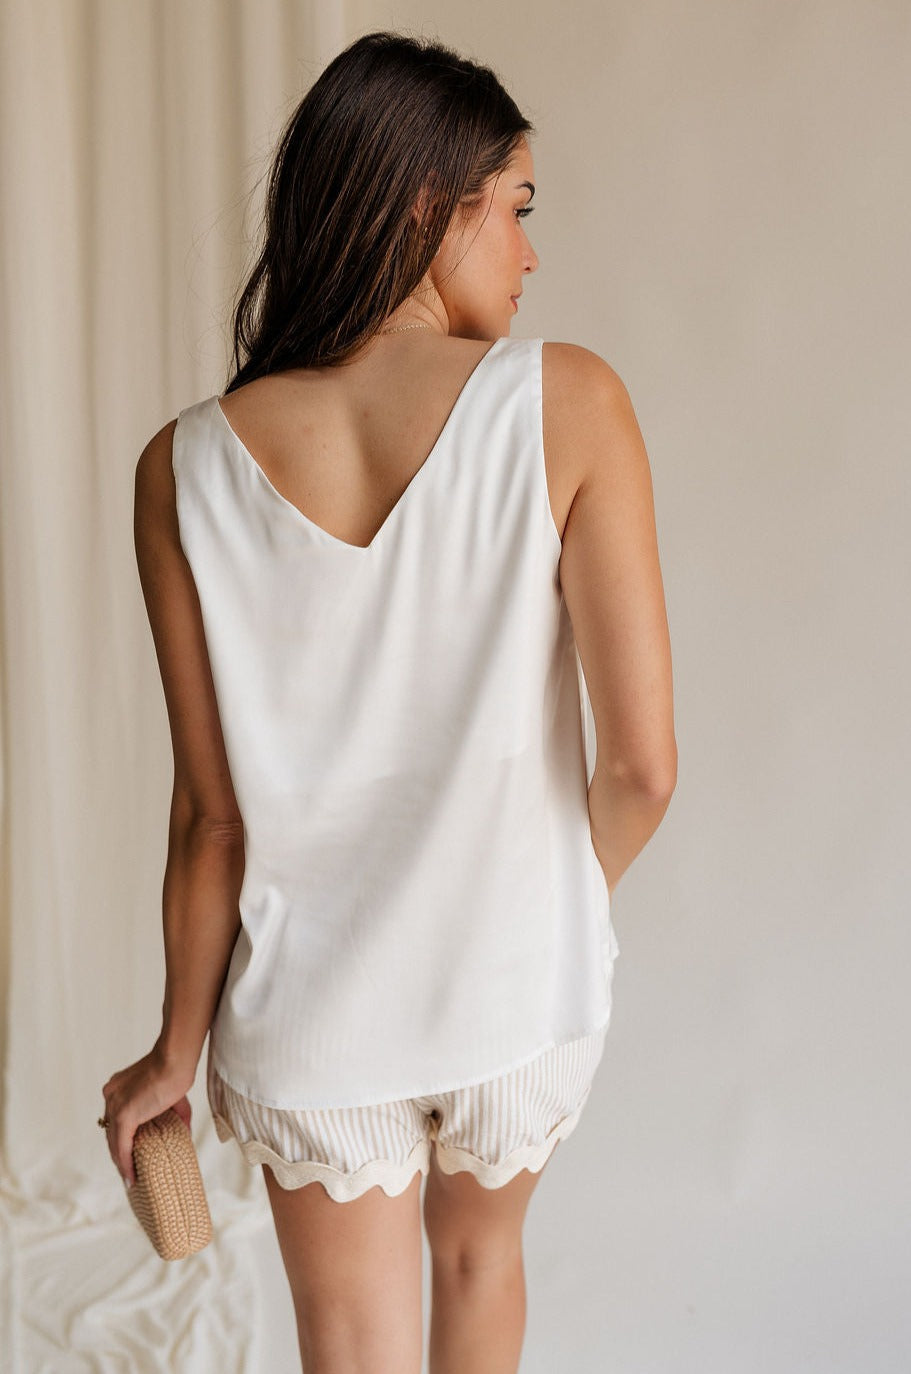 Back view of female model wearing the Monroe Off White Satin Tank Top that has off white satin fabric and a v-neckline.